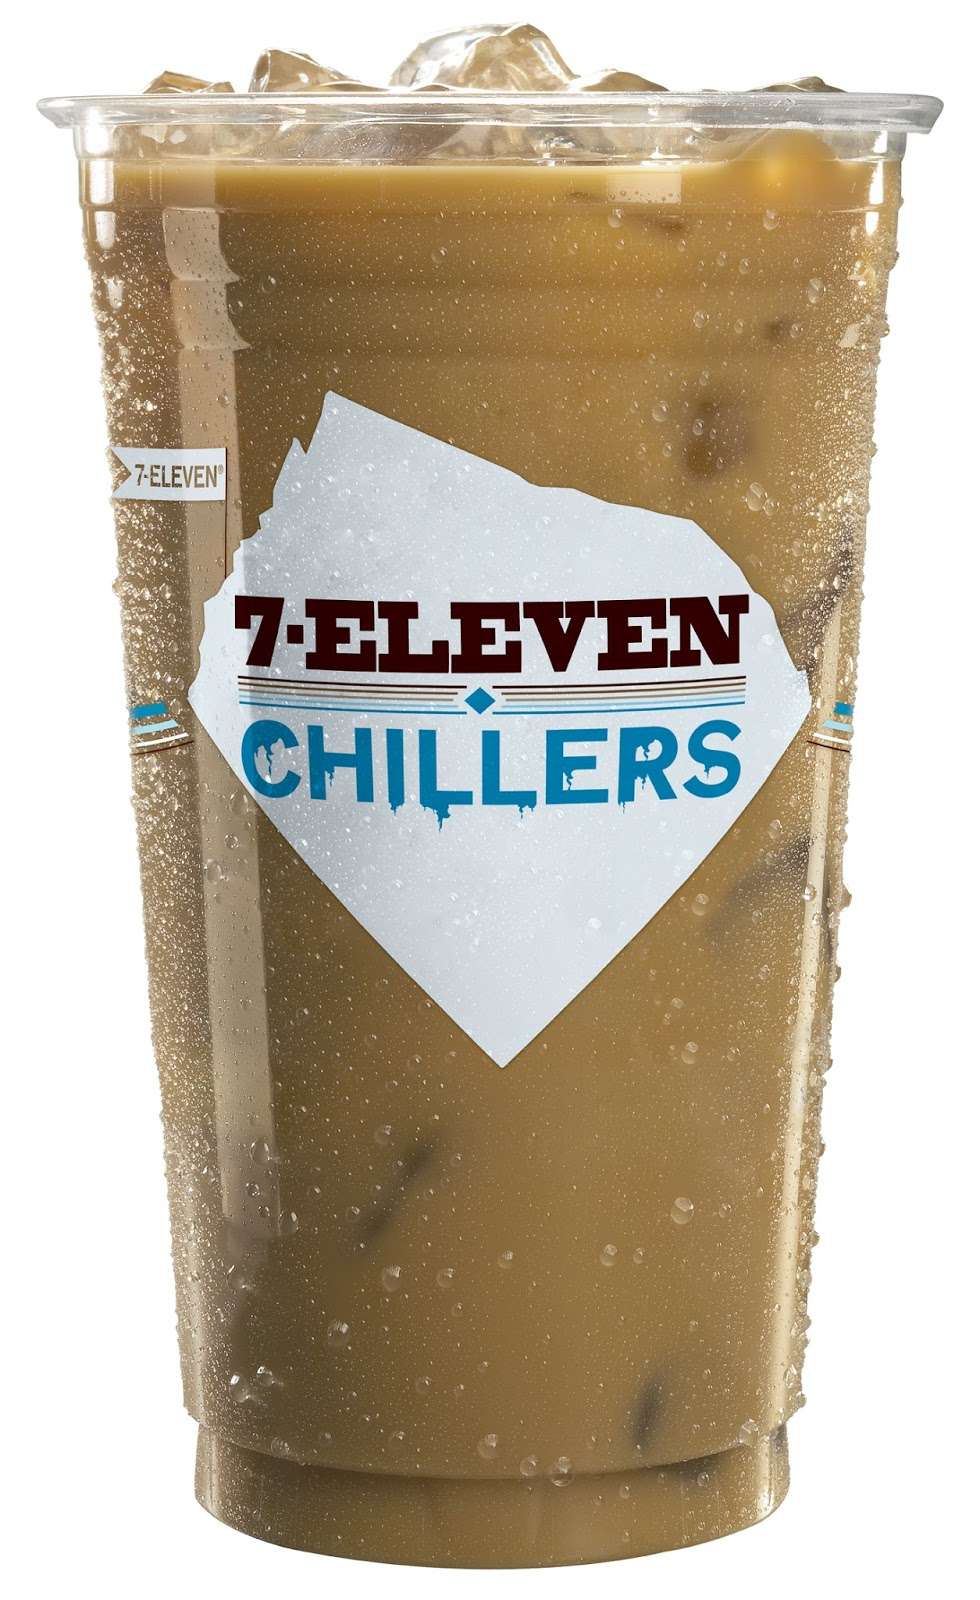 Coffee Lover: Ice, Ice Baby! One Dollar Iced Coffee Every Wednesday at 7